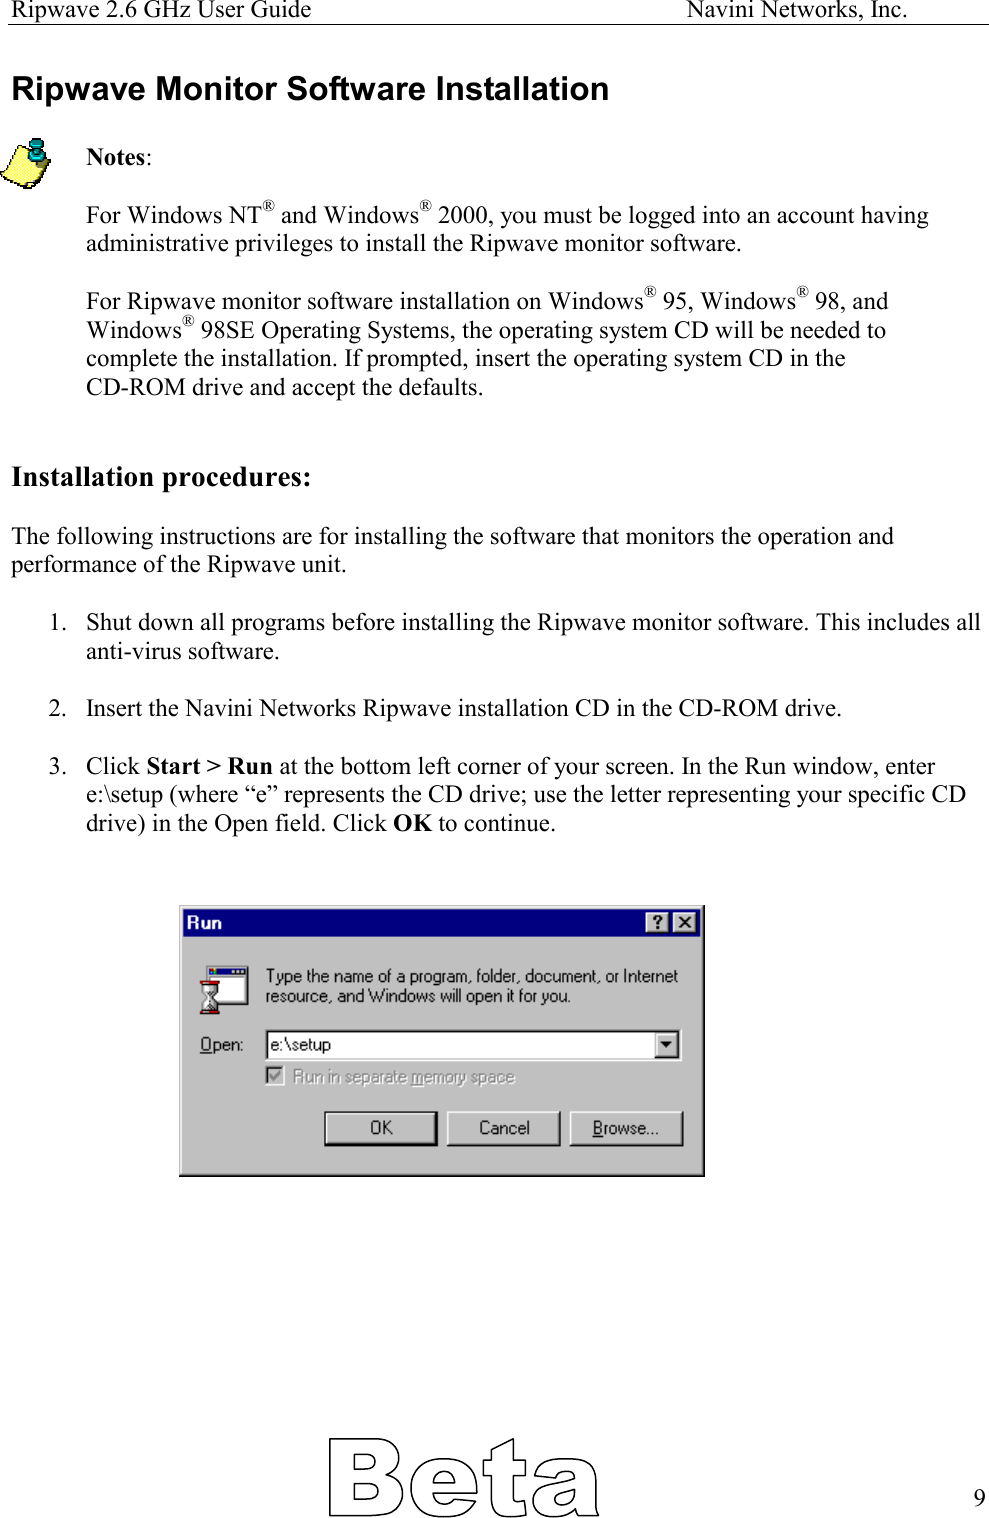 Ripwave 2.6 GHz User Guide                                                            Navini Networks, Inc. Ripwave Monitor Software Installation  Notes:   For Windows NT® and Windows® 2000, you must be logged into an account having administrative privileges to install the Ripwave monitor software.  For Ripwave monitor software installation on Windows® 95, Windows® 98, and Windows® 98SE Operating Systems, the operating system CD will be needed to complete the installation. If prompted, insert the operating system CD in the  CD-ROM drive and accept the defaults.   Installation procedures:  The following instructions are for installing the software that monitors the operation and performance of the Ripwave unit.   1.  Shut down all programs before installing the Ripwave monitor software. This includes all anti-virus software.  2.  Insert the Navini Networks Ripwave installation CD in the CD-ROM drive.  3. Click Start &gt; Run at the bottom left corner of your screen. In the Run window, enter e:\setup (where “e” represents the CD drive; use the letter representing your specific CD drive) in the Open field. Click OK to continue.                 9